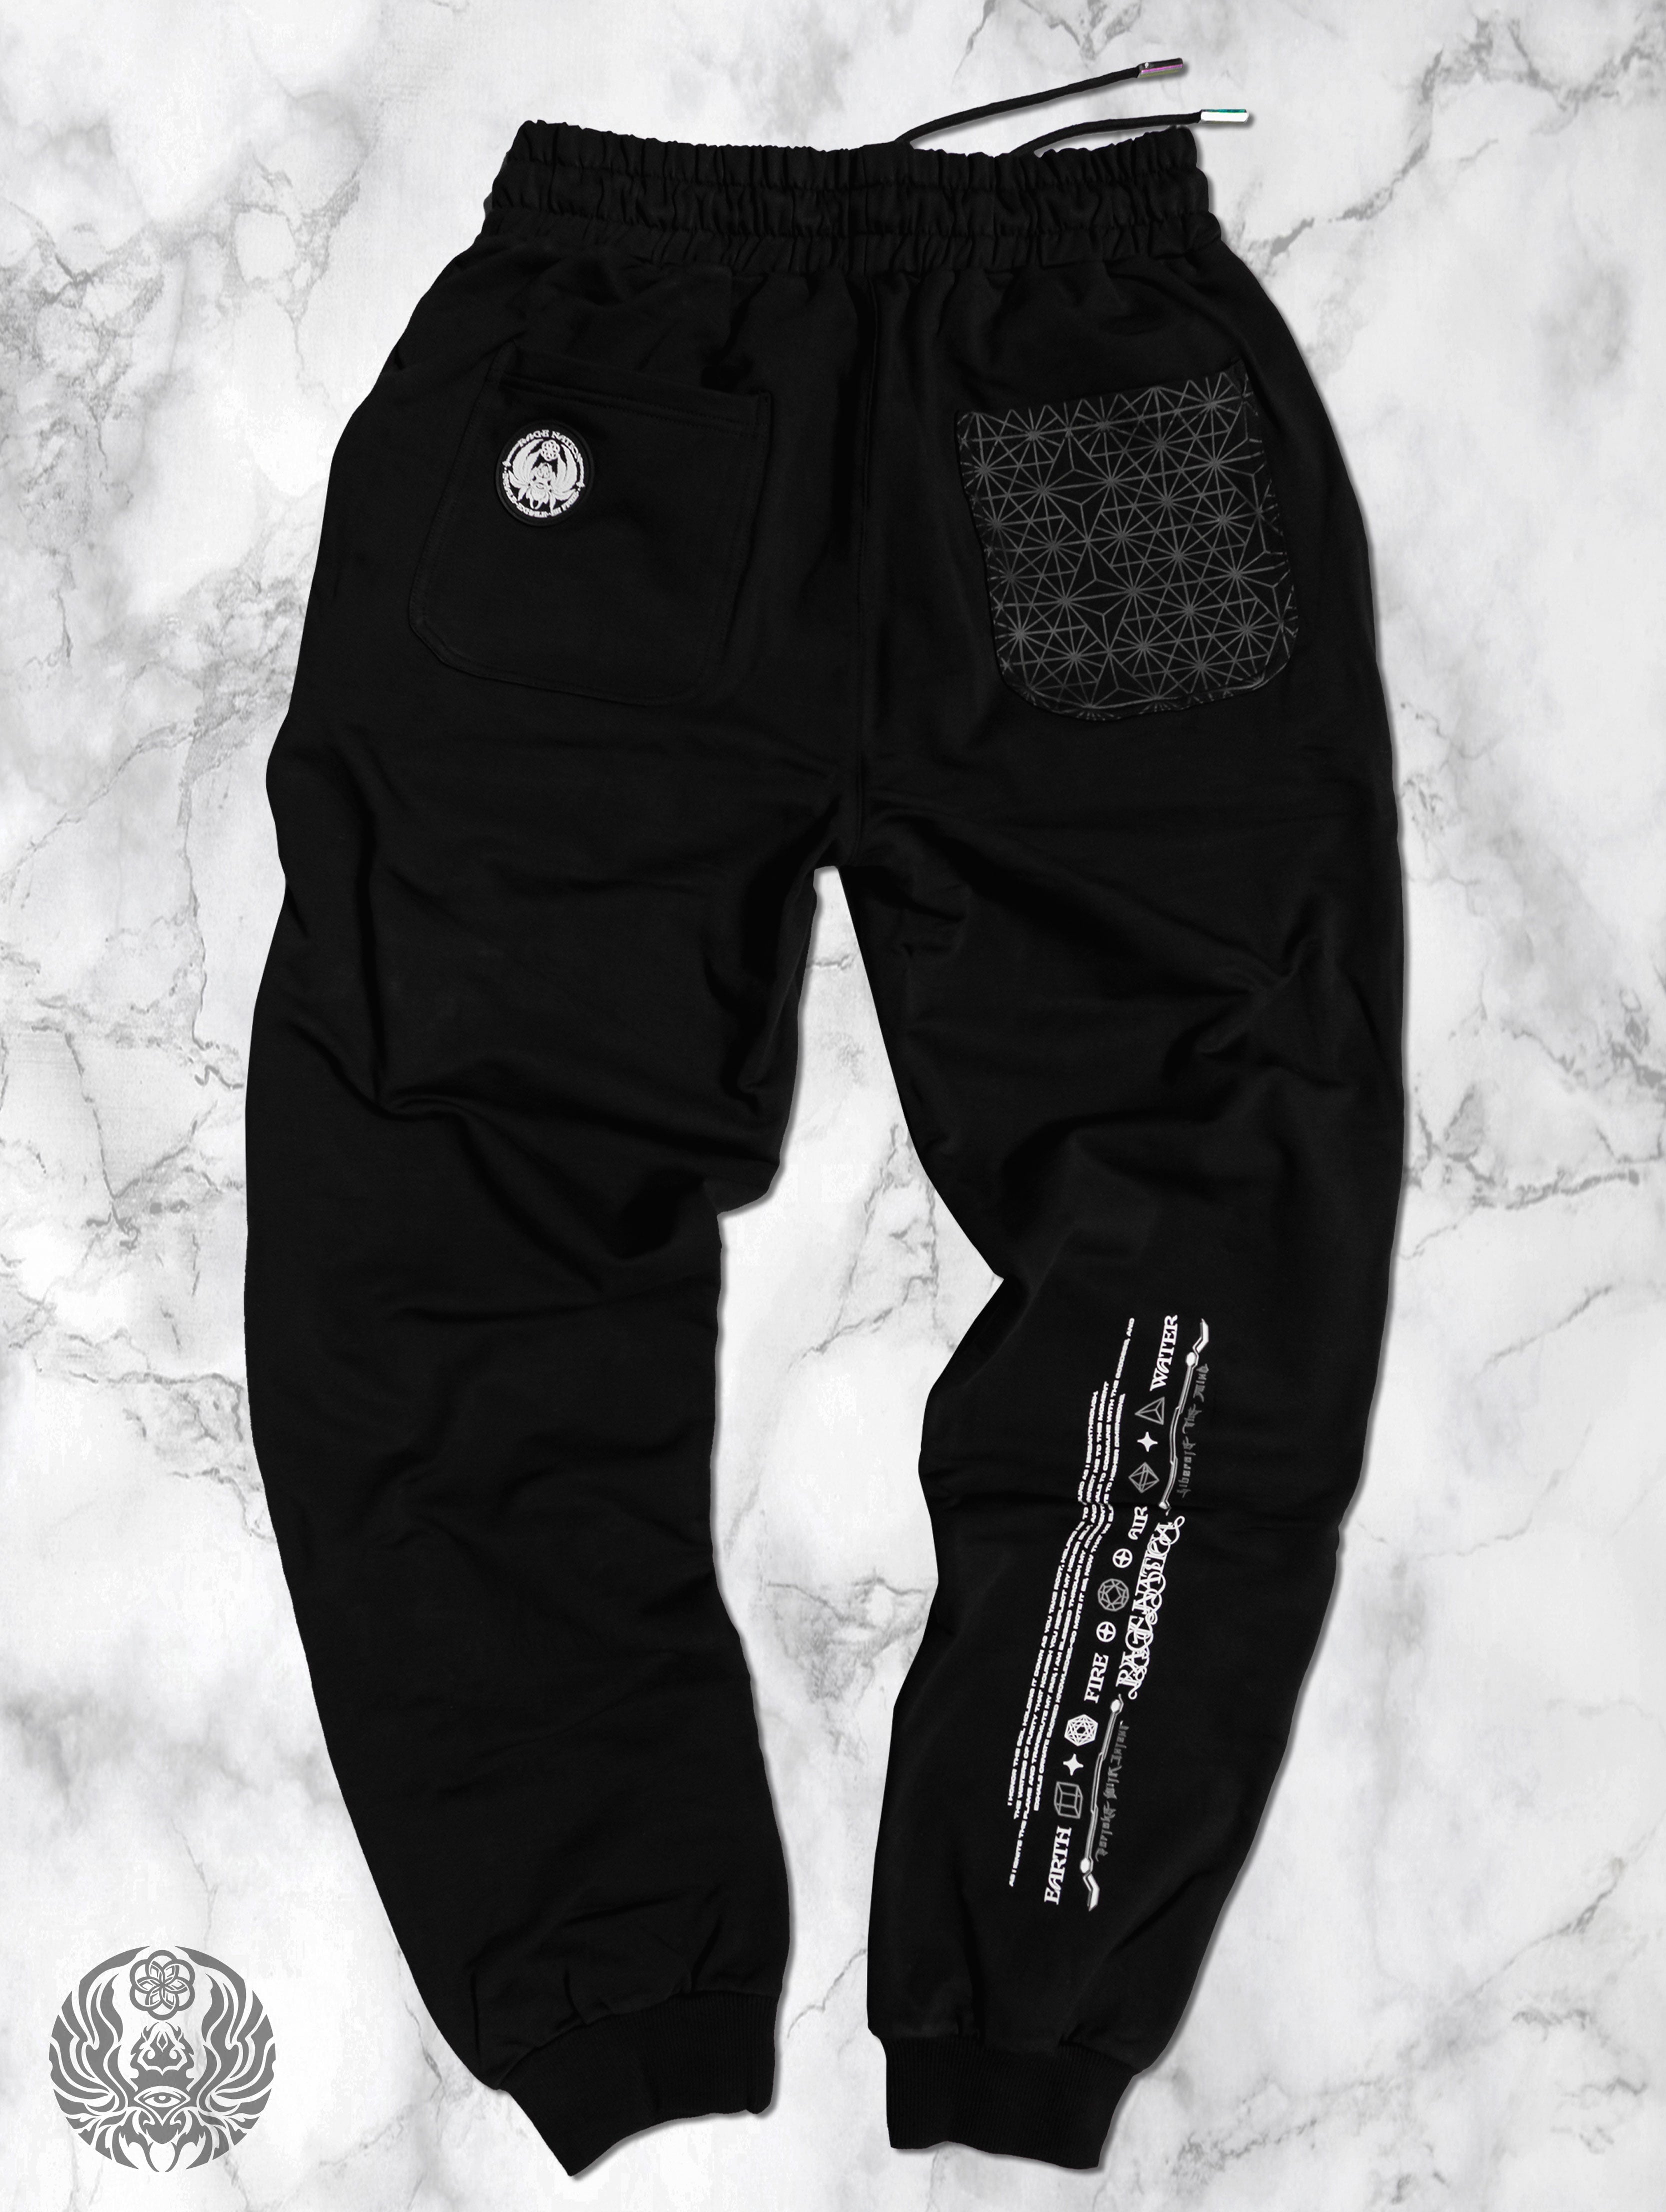 NEW RELEASE ✦ CONVENE WITH THE ELEMENTS ✦ Premium Unisex Joggers Joggers 